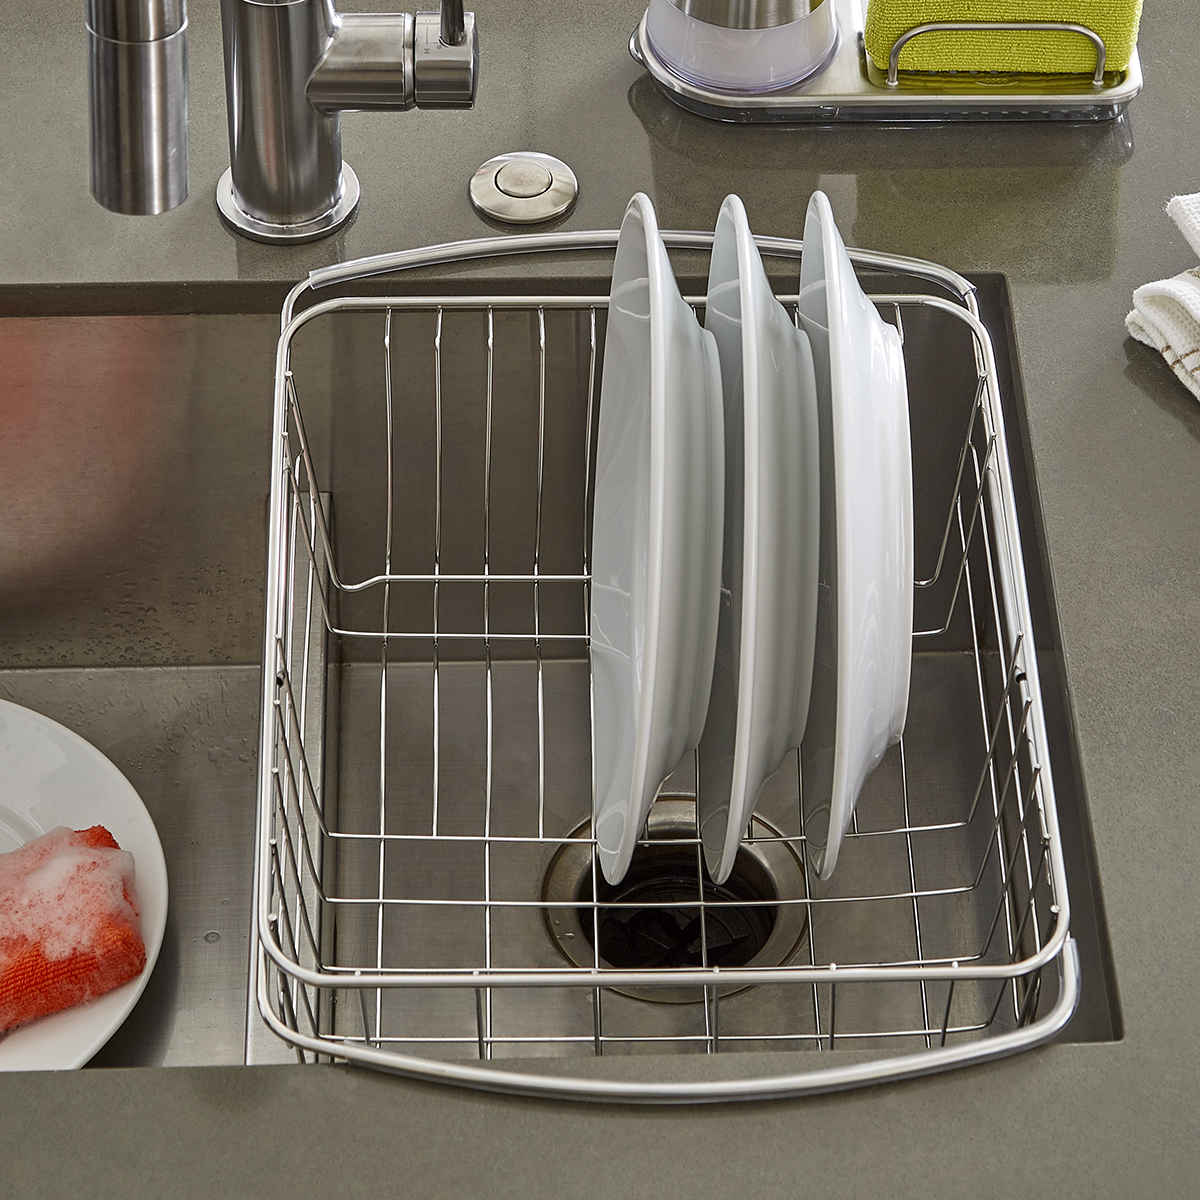 https://www.containerstore.com/catalogimages/324802/10011443-Kitchen-Sink-Started-Kit.jpg